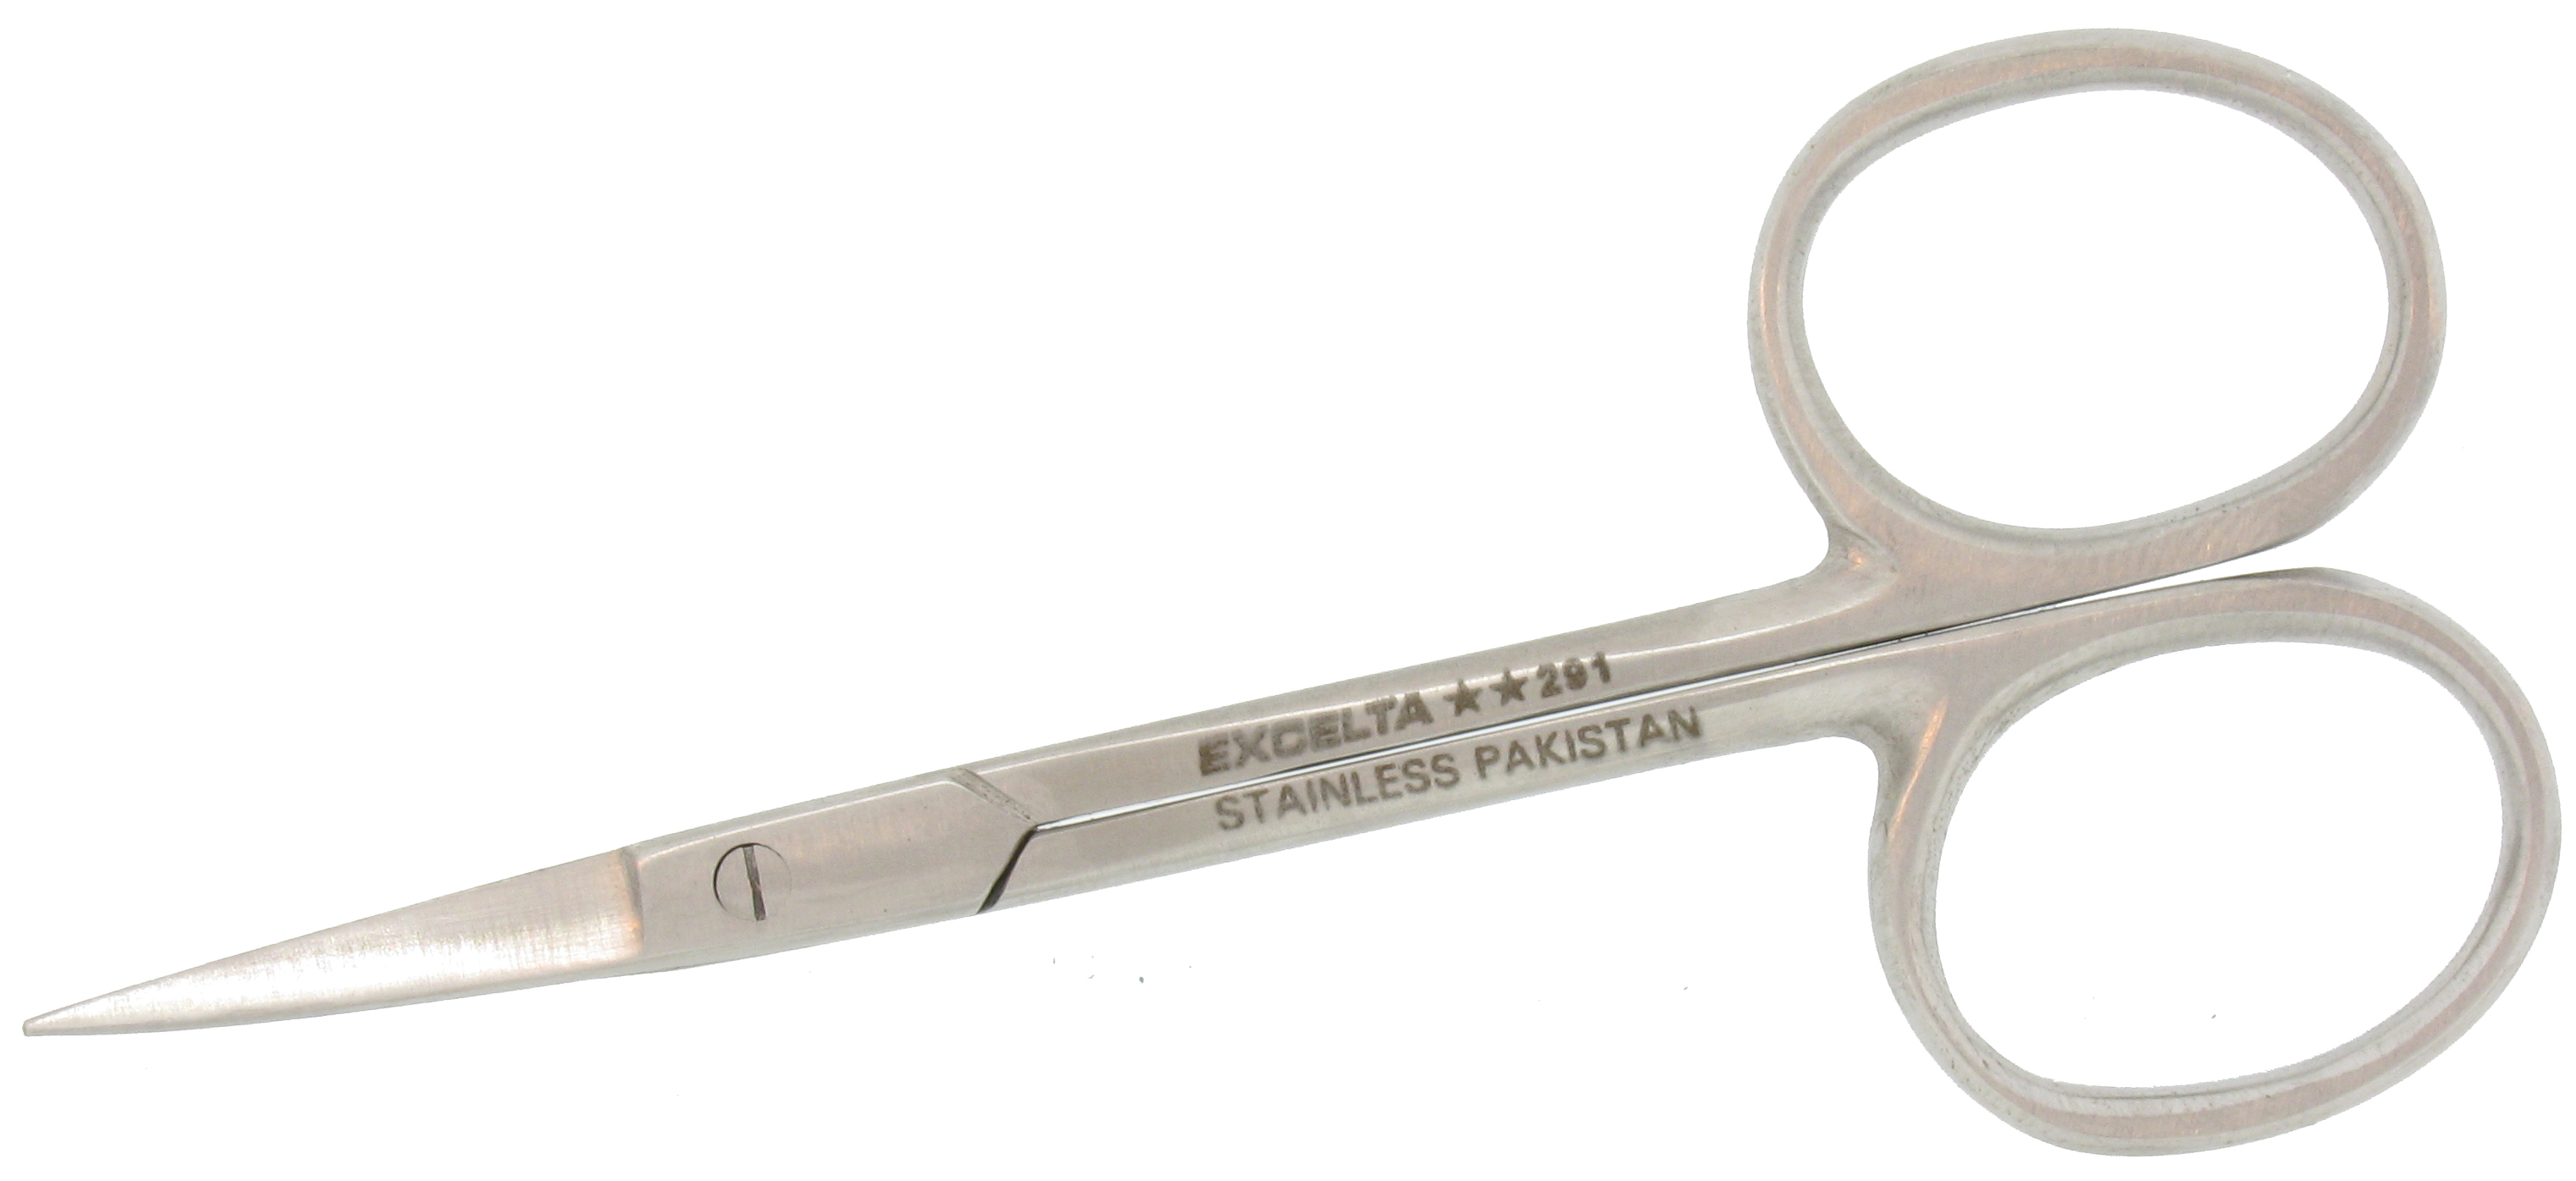 Excelta 291 3.75inch Curved Stainless Steal Scissor